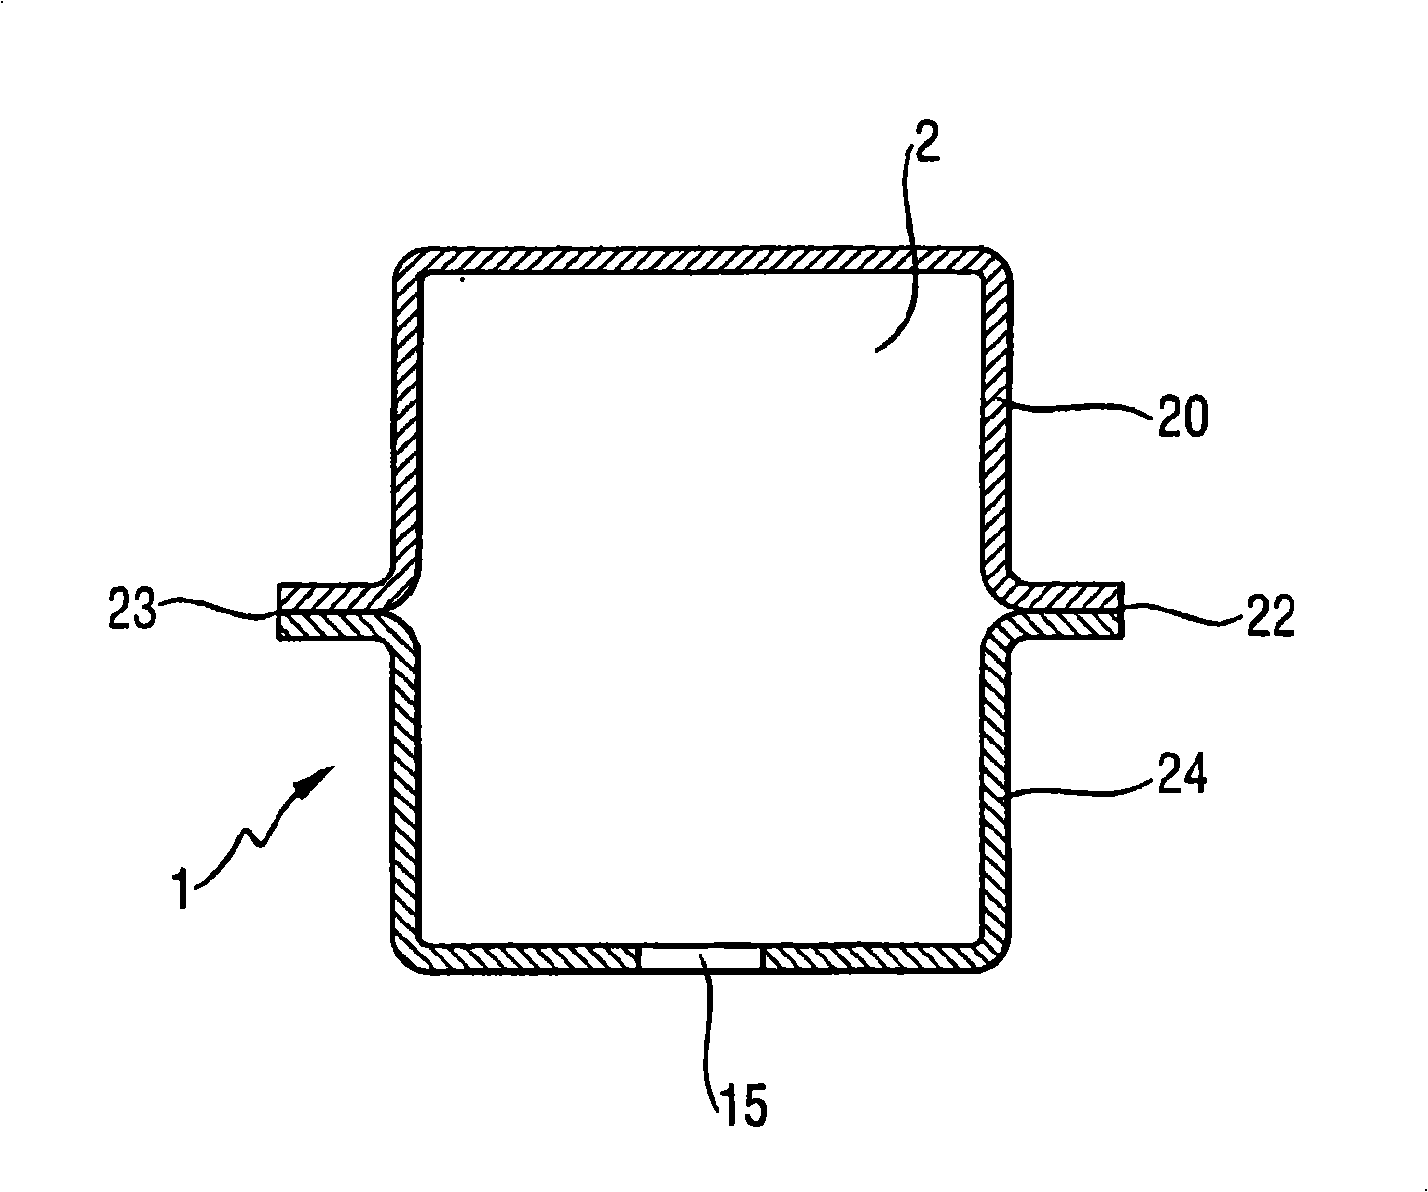 Expandable filler insert and methods of producing the expandable filler insert